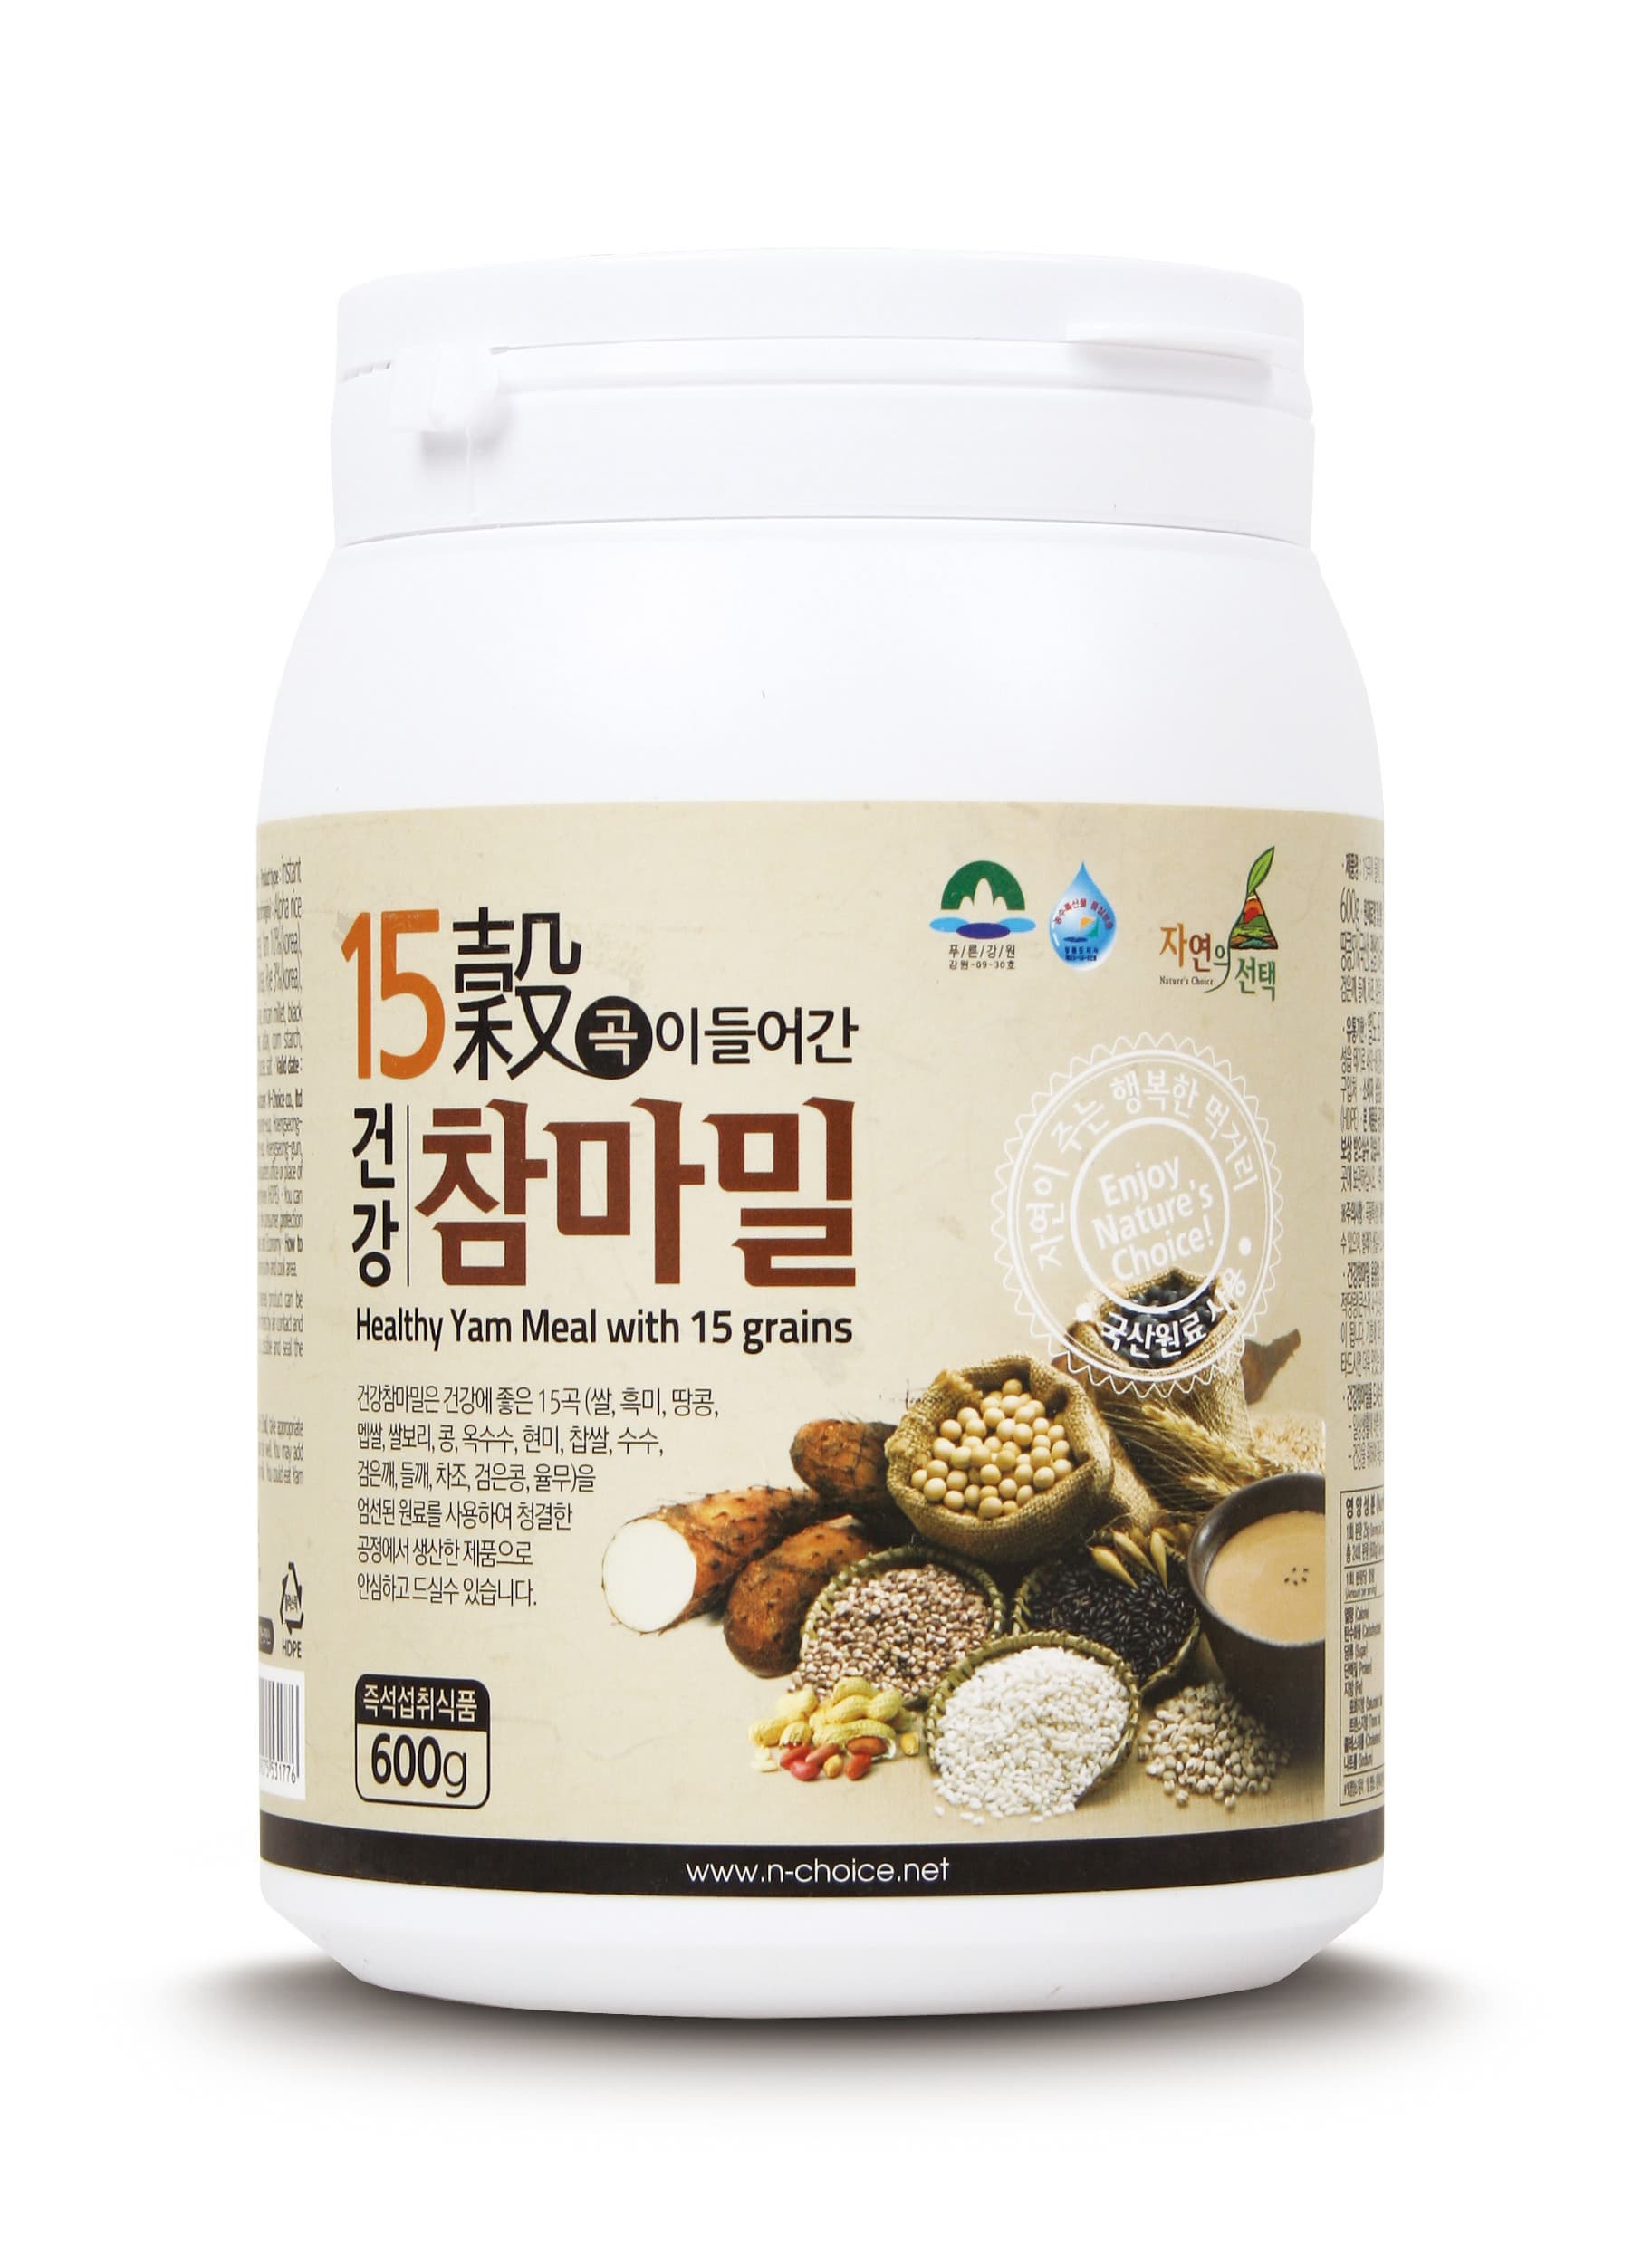 Healthy yam meal with 15 grains 600g